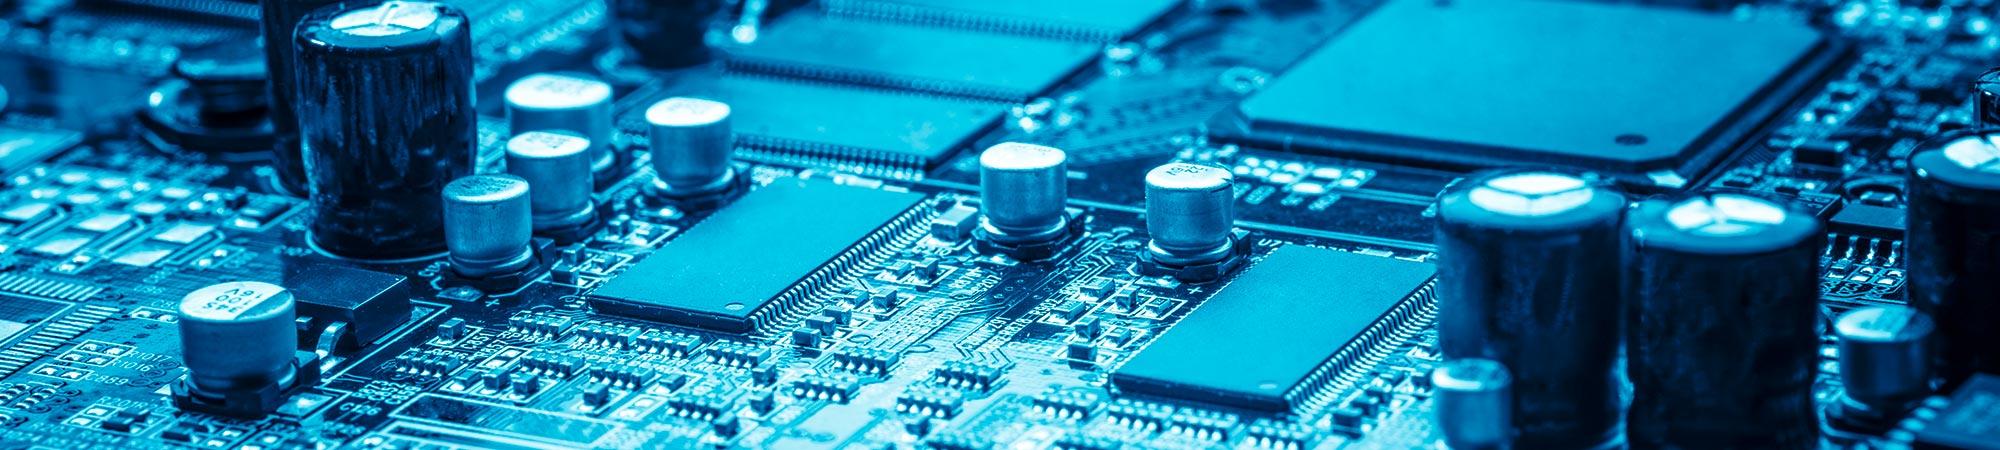 Embedded Systems - keiltronic engineering